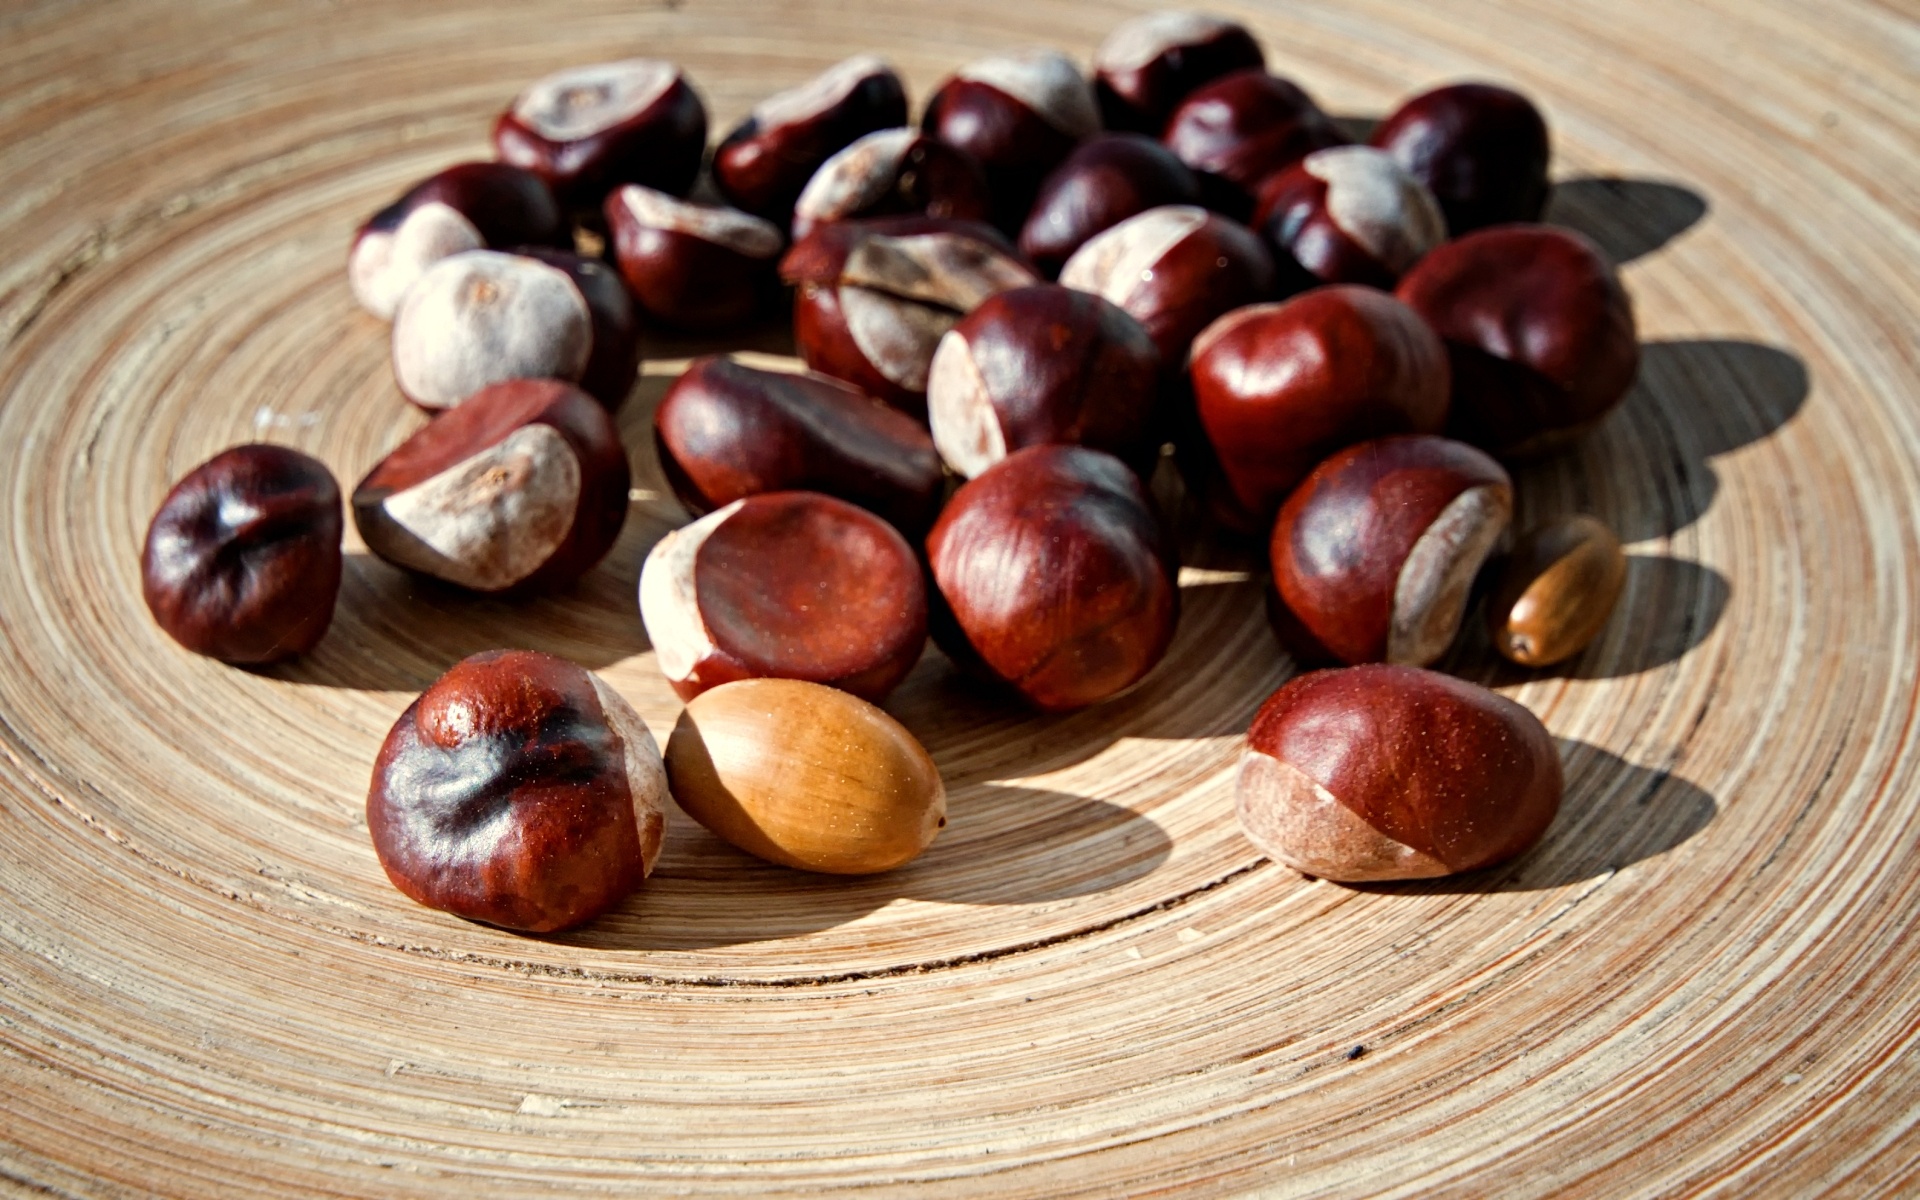 Chestnuts in a bowl, Wholesome snack, Wooden background, Seasonal imagery, 1920x1200 HD Desktop